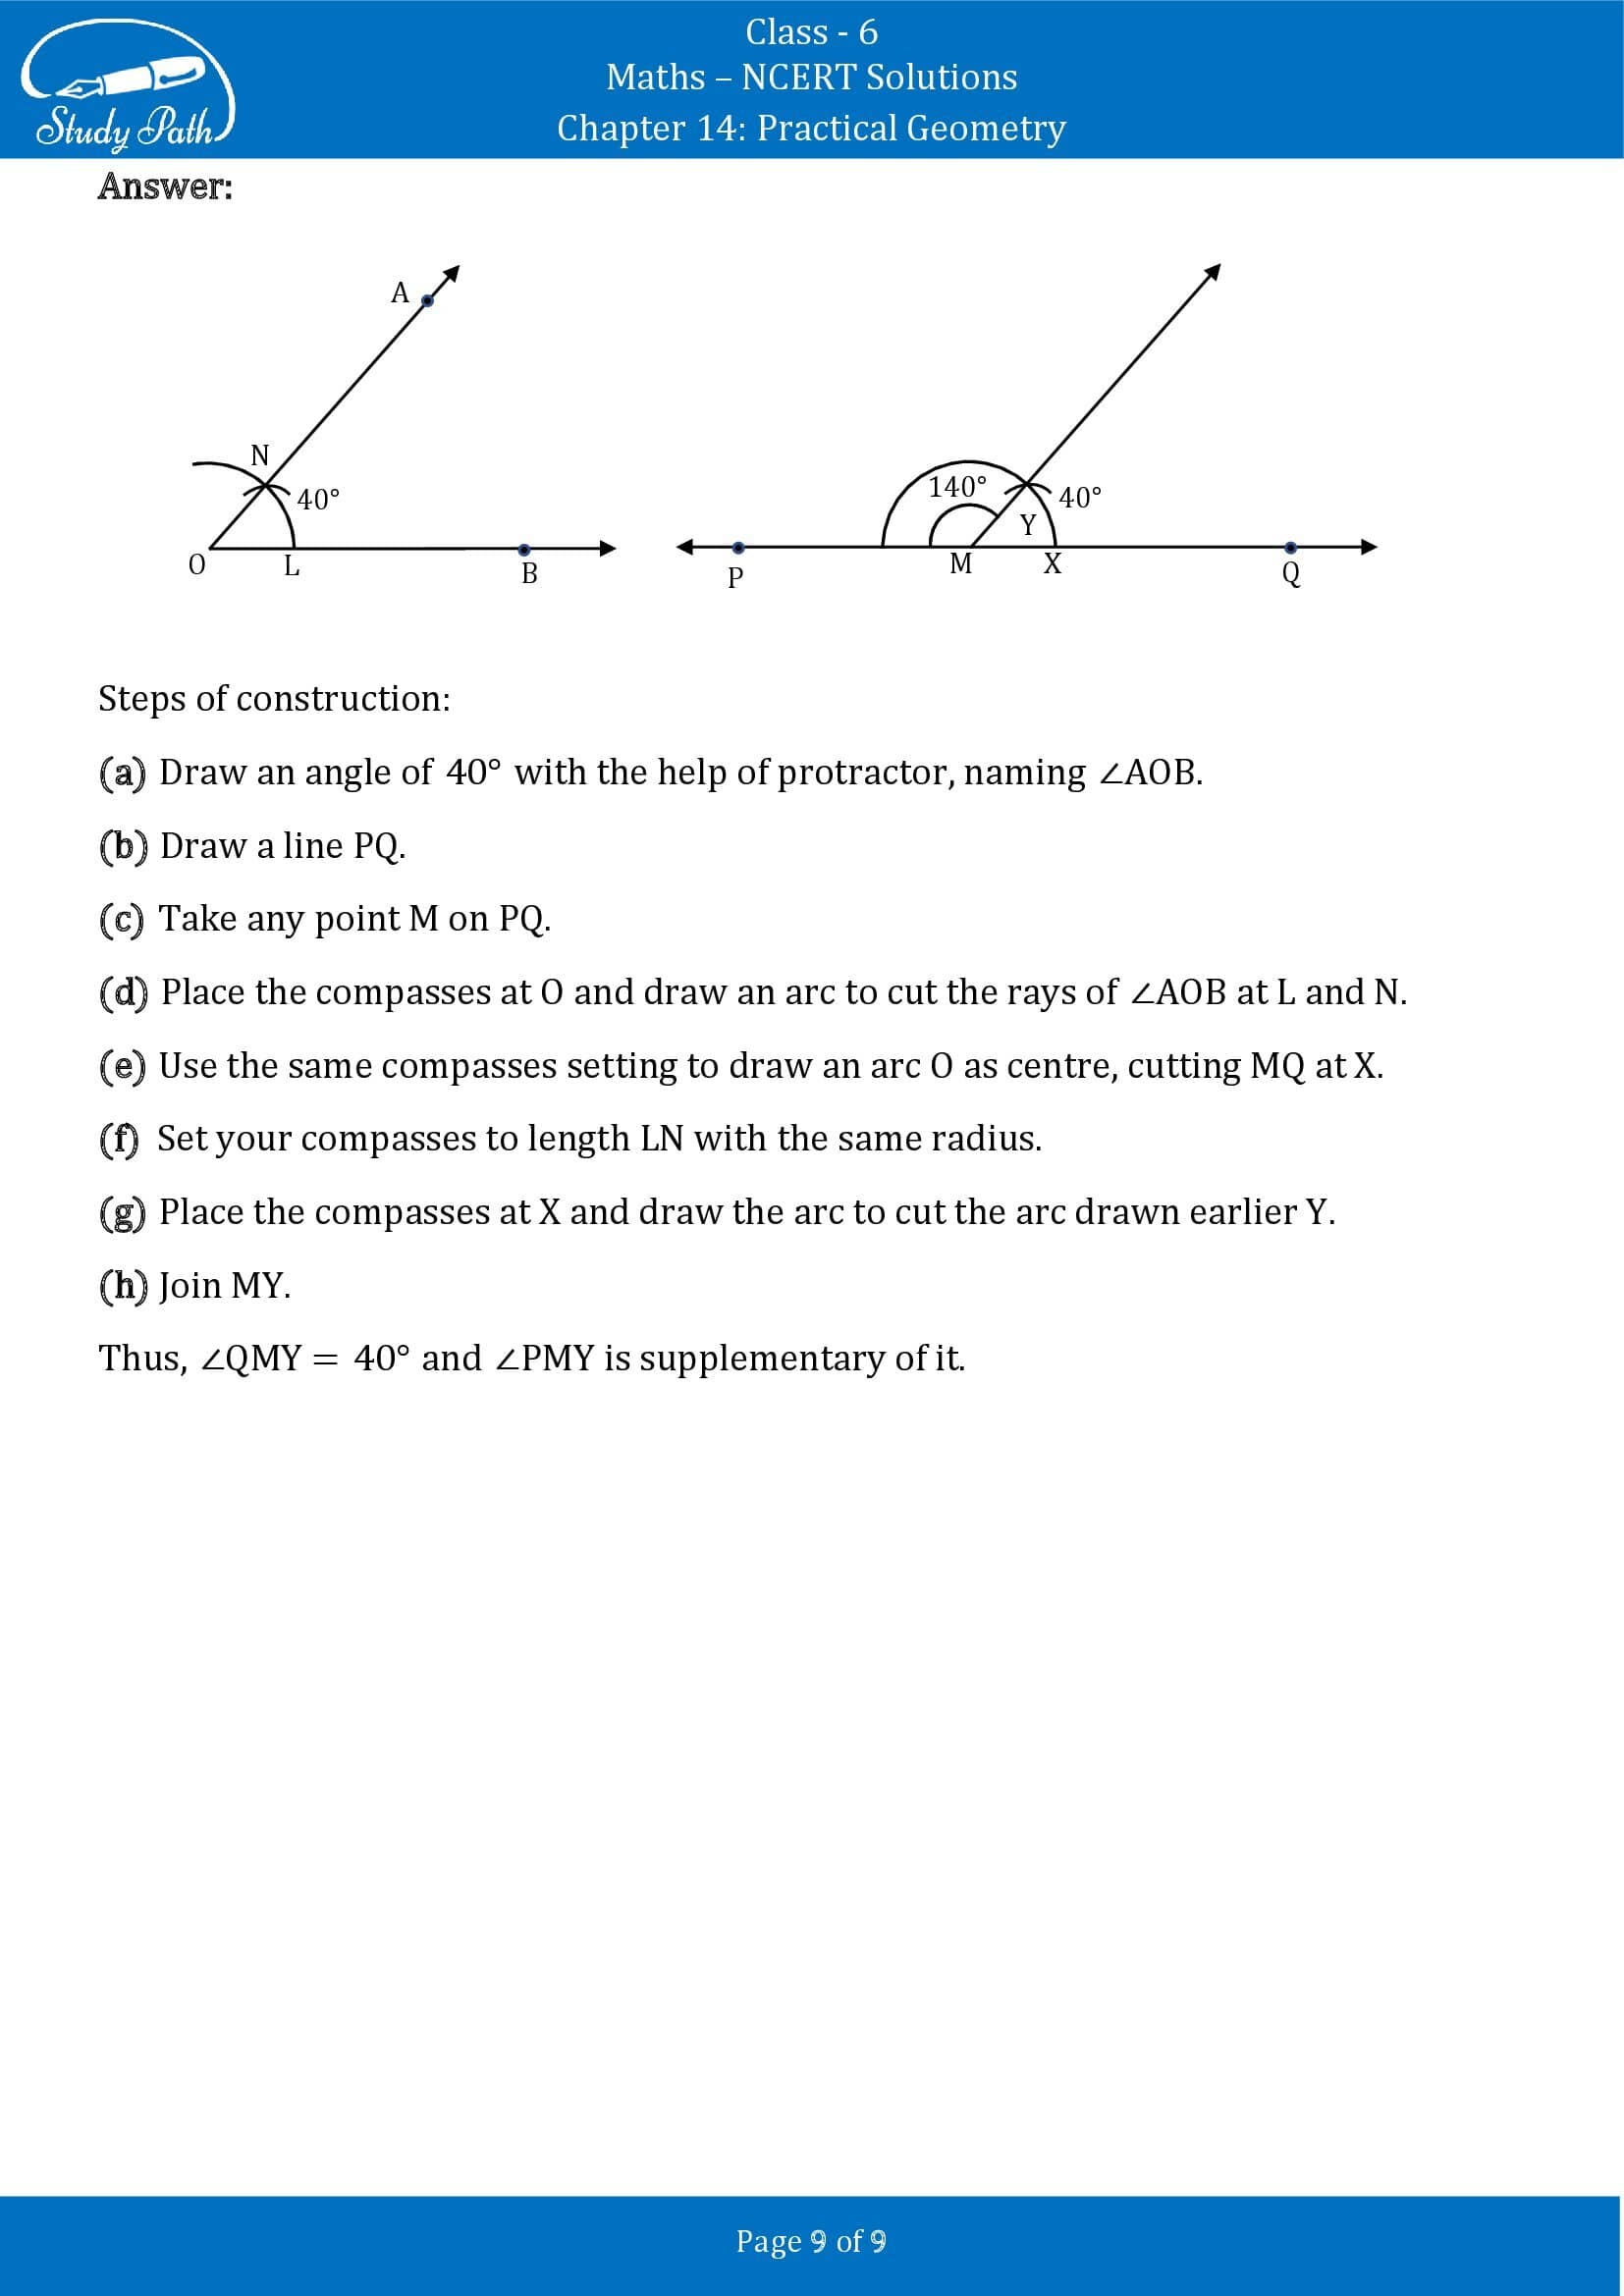 NCERT Solutions for Class 6 Maths Chapter 14 Practical Geometry Exercise 14.6 00009